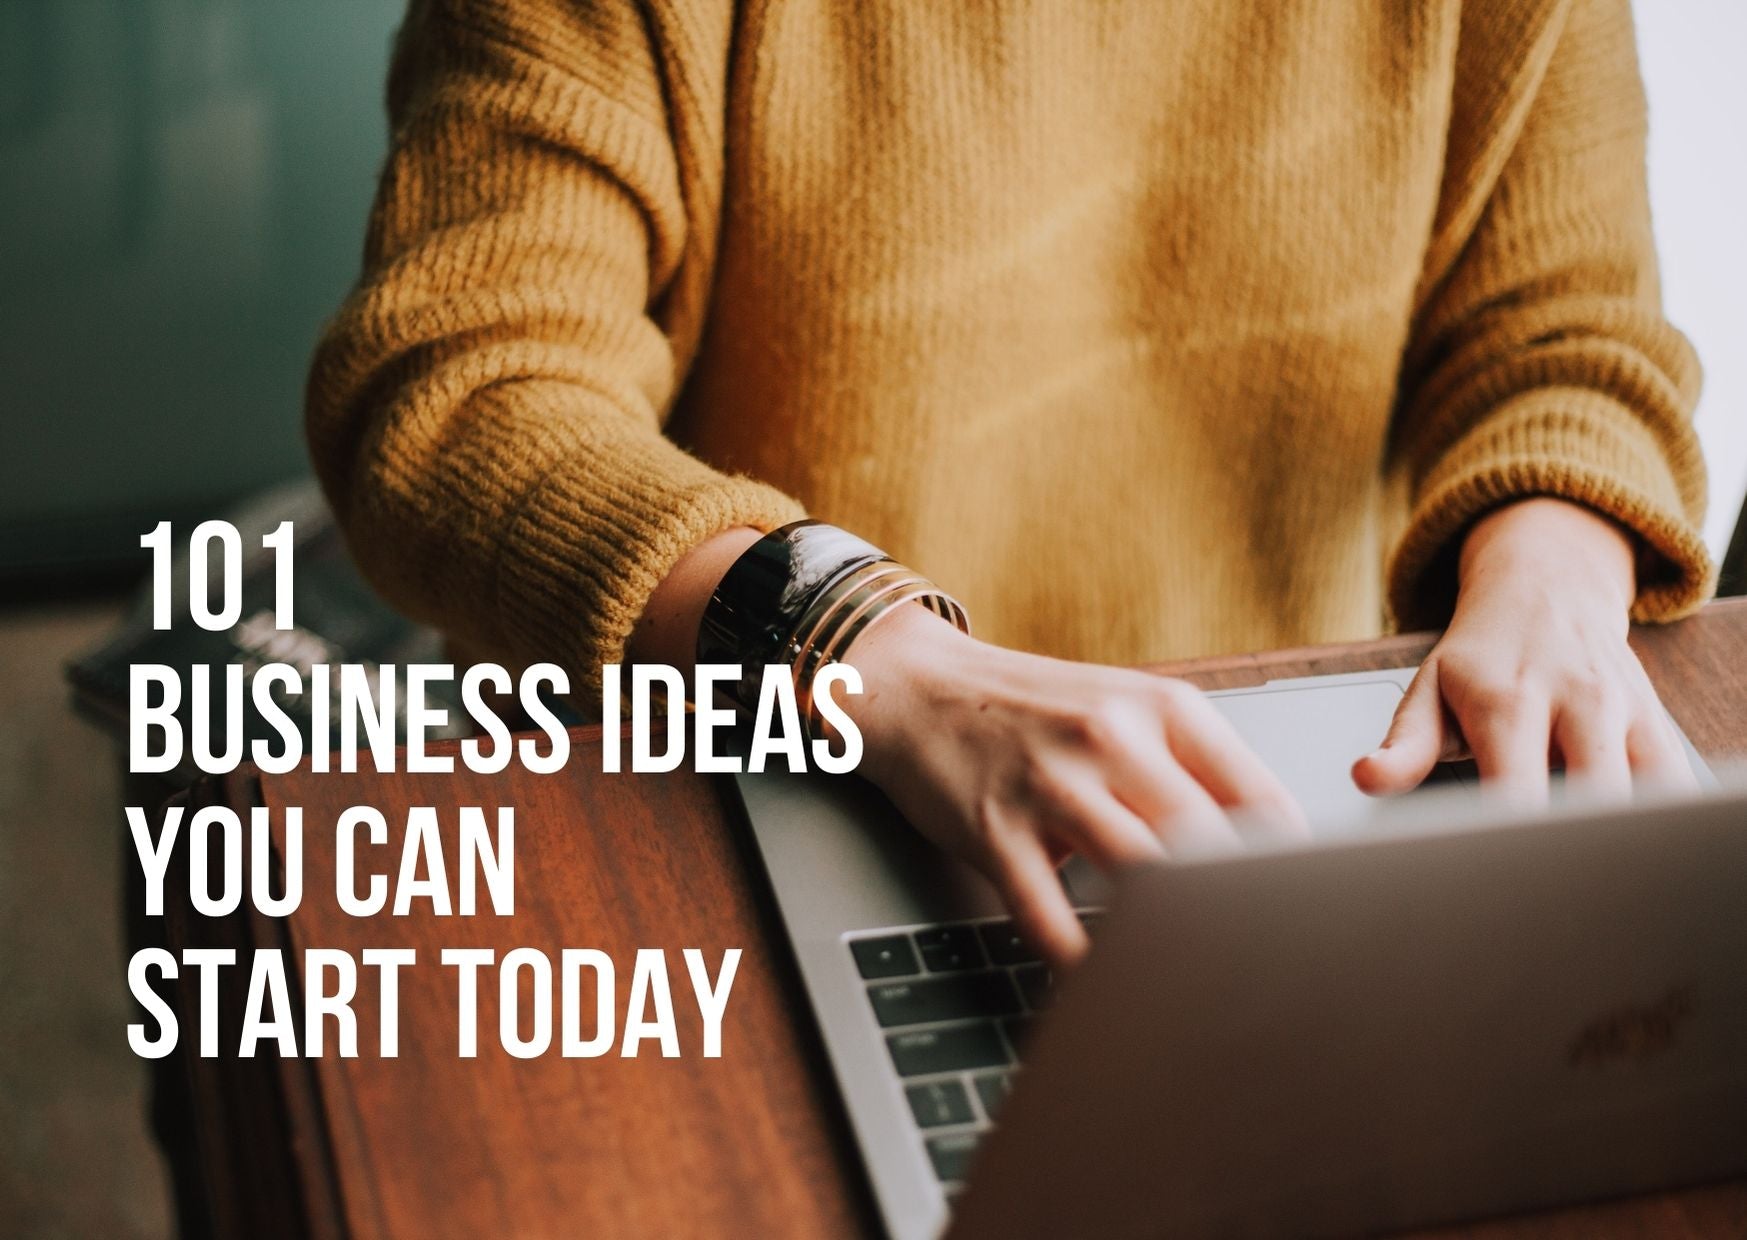 101 Business Ideas You Can Start Today | SR Mailing Ltd